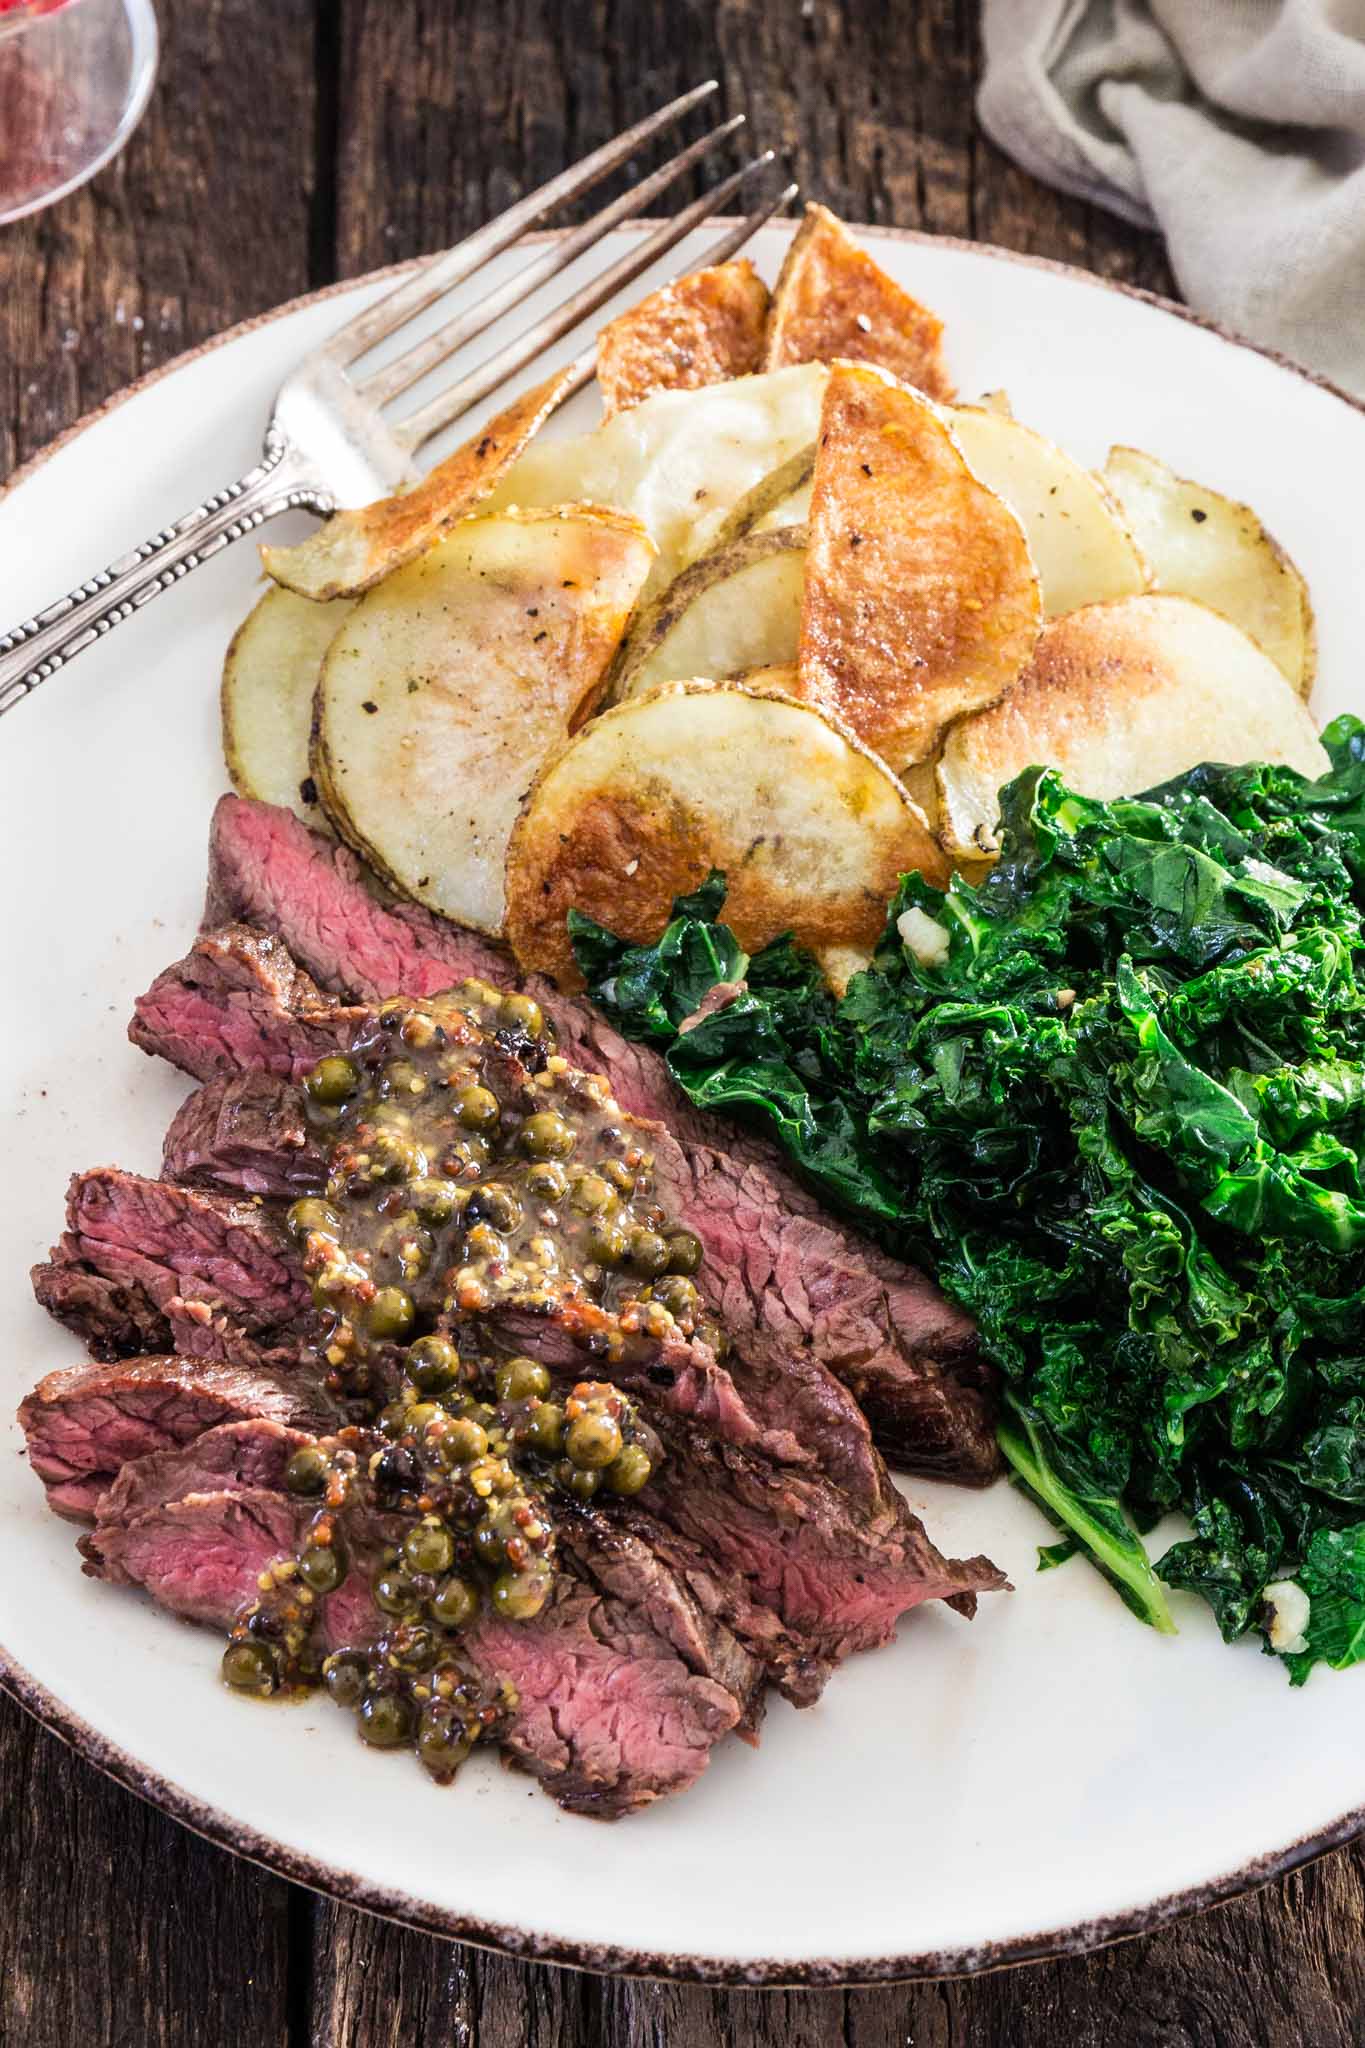 Steaks with Green Peppercorn Sauce | www.oliviascuisine.com | If you're looking for an impressive meal that is easy enough to put together on a weekday, this Steak with Green Peppercorn Sauce is the answer! The steak is cooked to perfection and served with a silky mustard-y peppercorn sauce, kale and roasted potatoes.